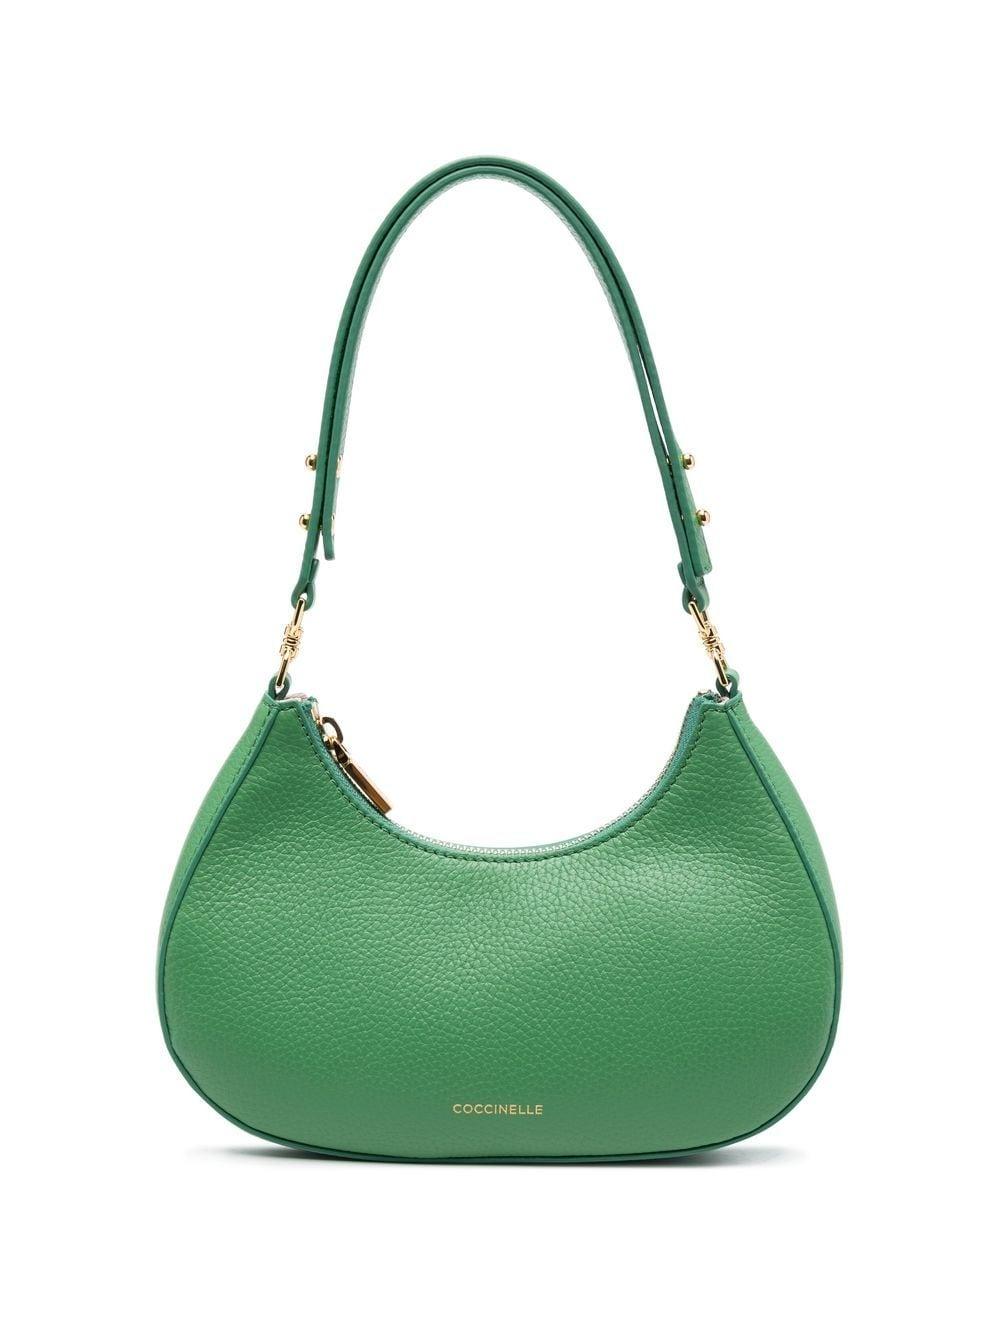 Coccinelle Mini Carrie Leather Shoulder Bag in Green | Lyst